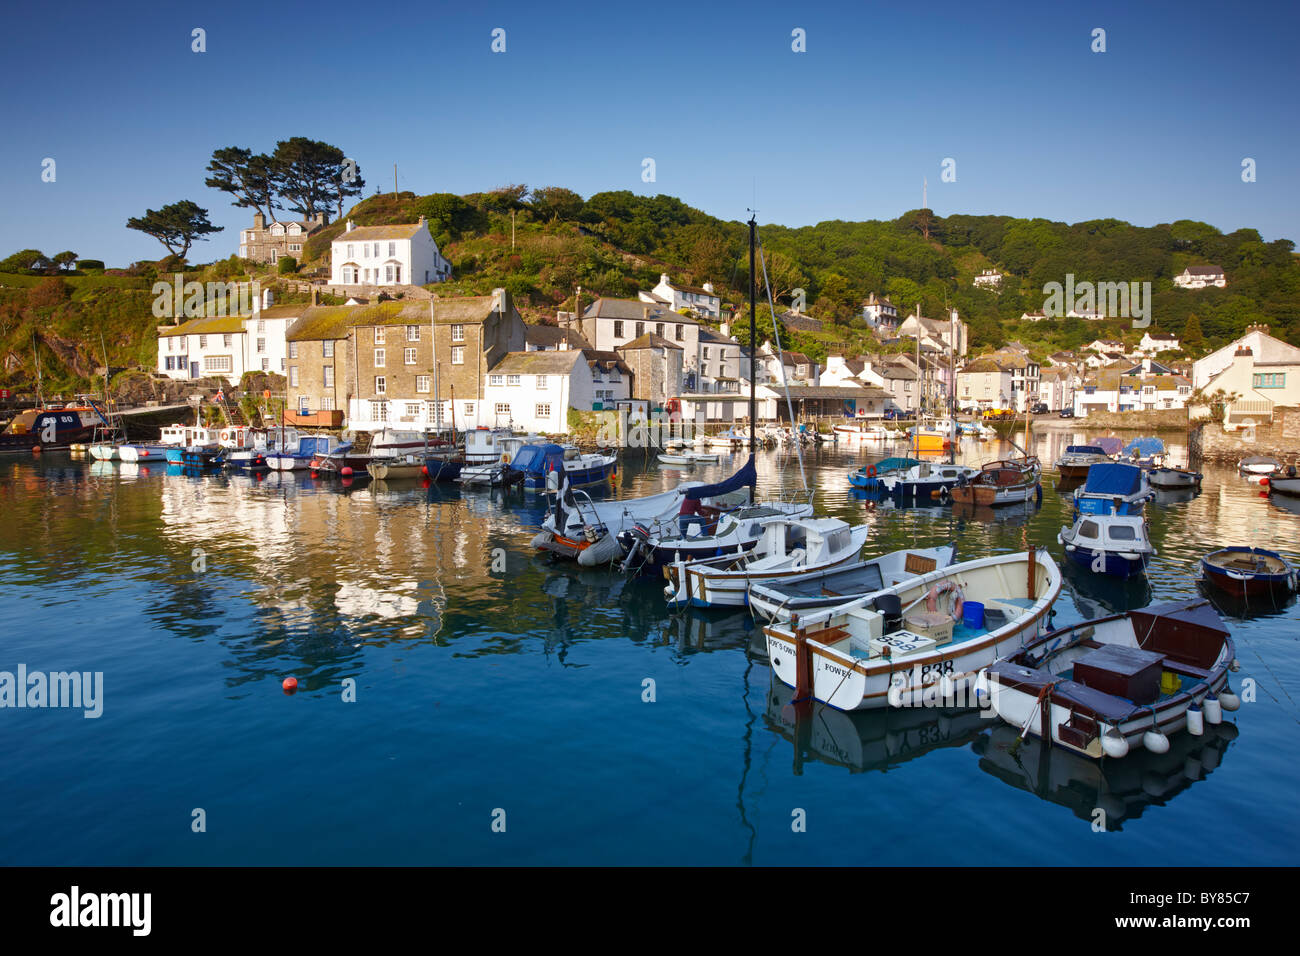 Morning view overlooking the quaint fishing village of Polperro Stock Photo